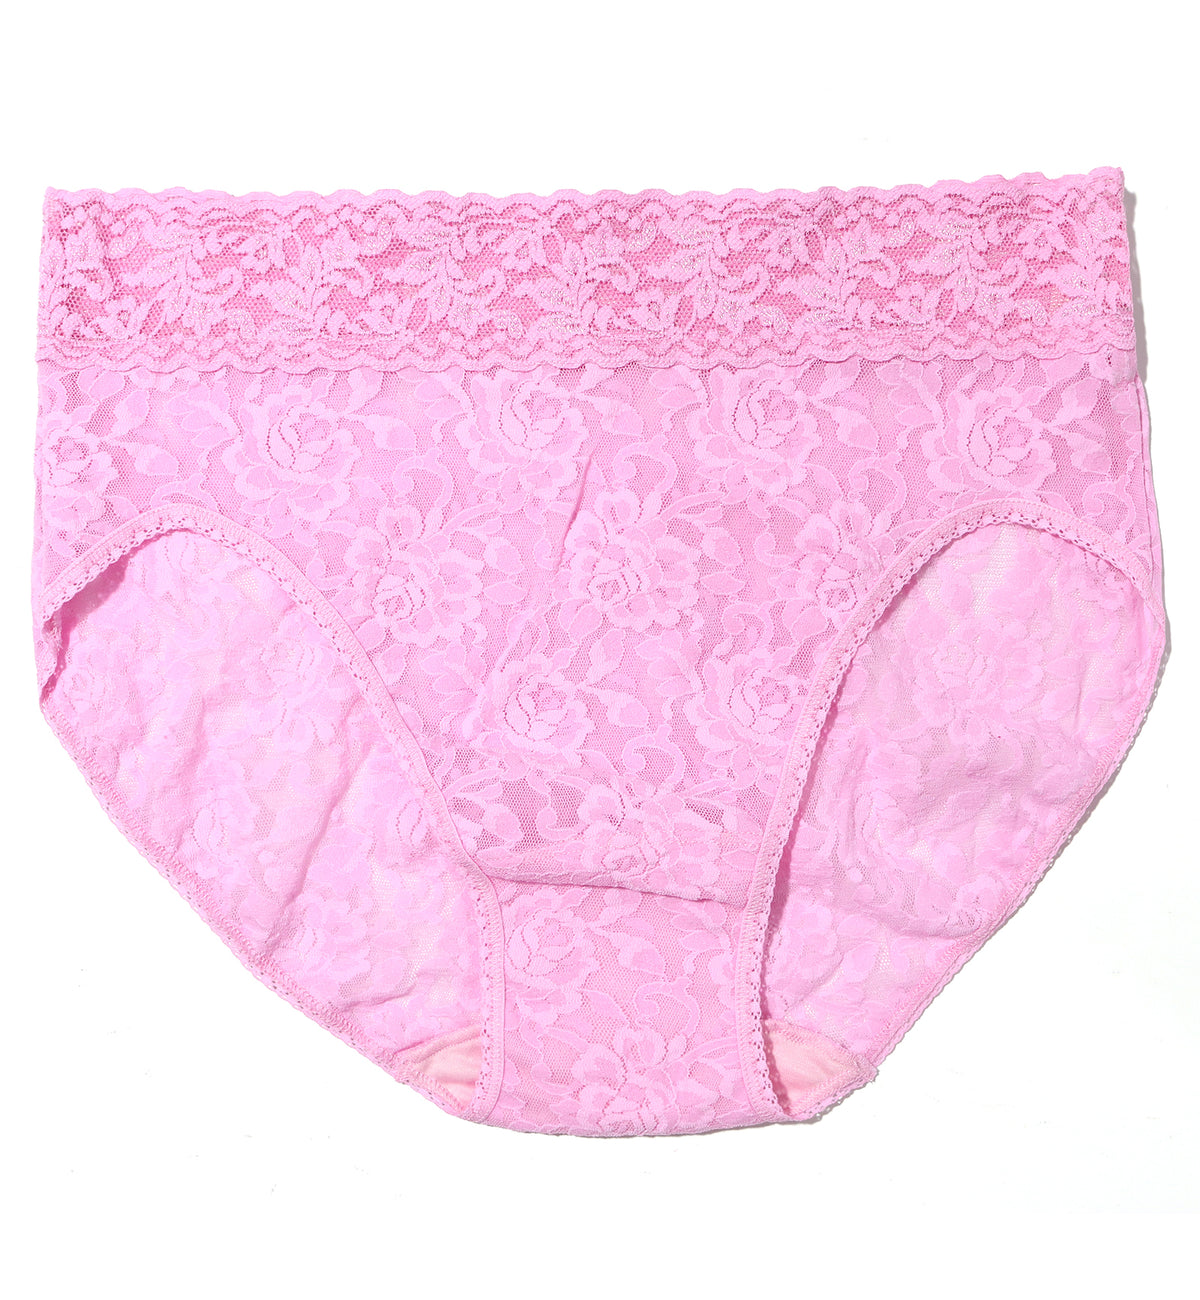 Hanky Panky Signature Lace French Brief (461),Small,Cotton Candy - Cotton Candy,Small